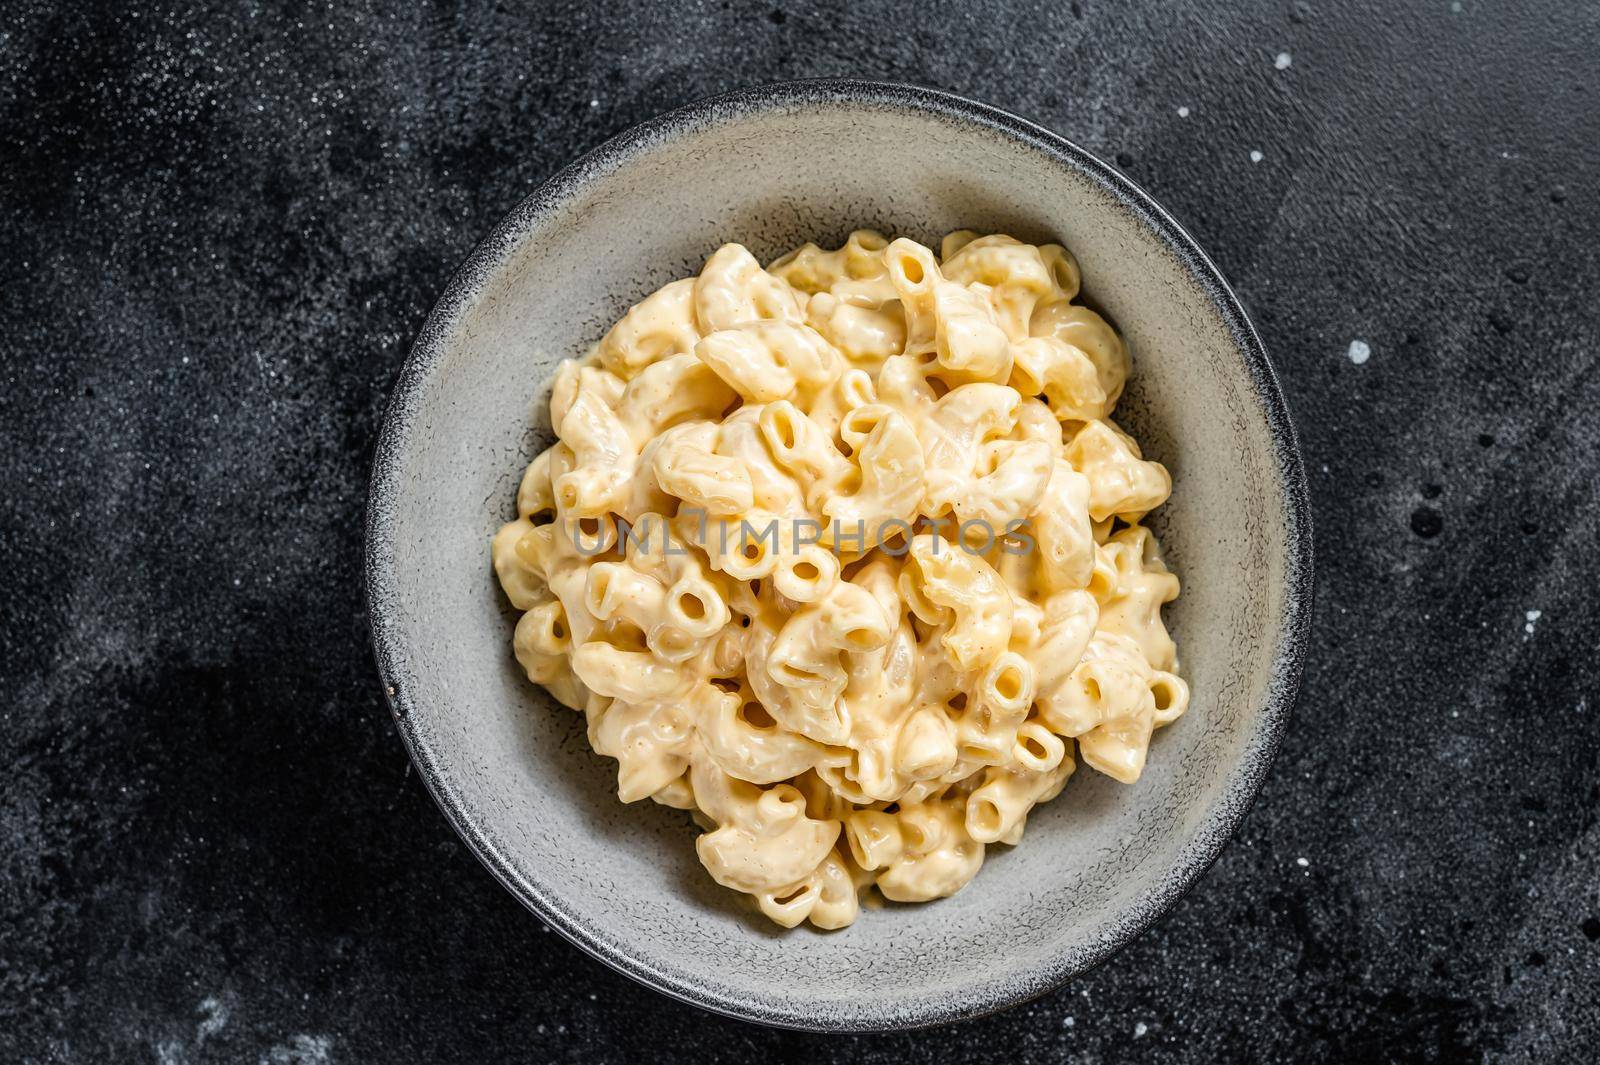 Mac and cheese american macaroni pasta with cheesy Cheddar sauce. Black background. Top view by Composter